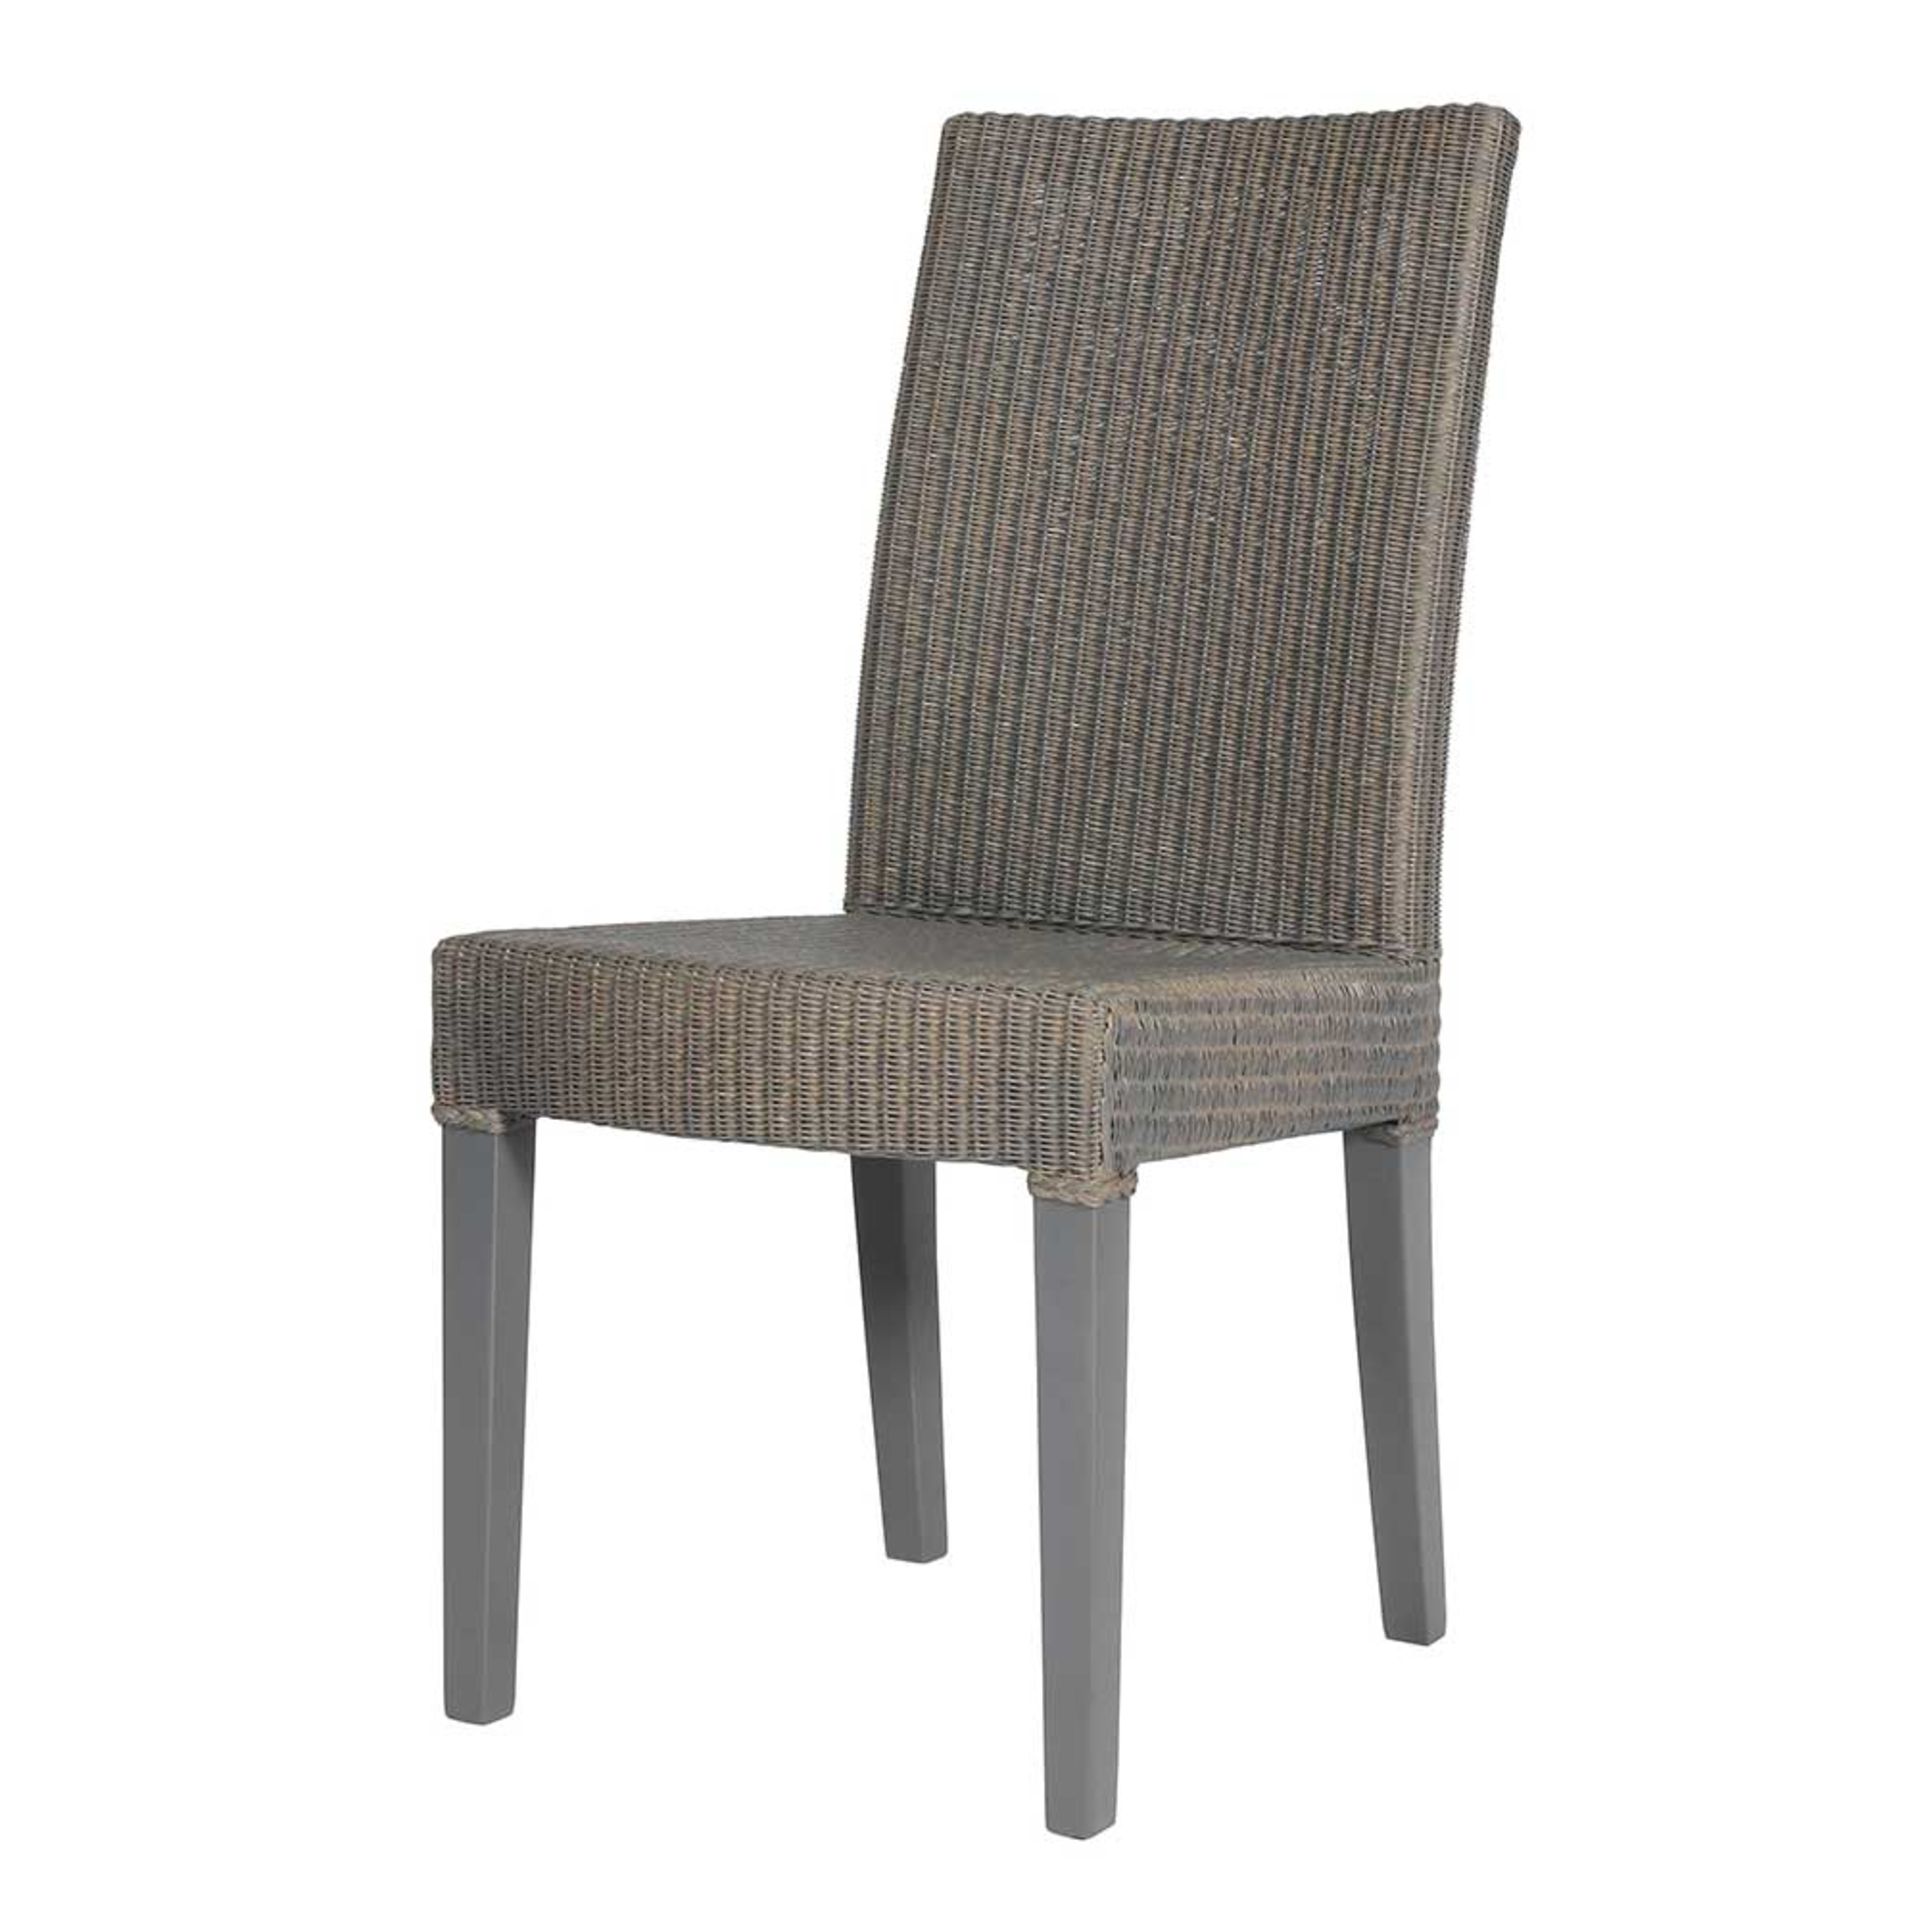 4 x Lina Two Tone Lloyd Loom Woven Dining Chairs - Contemporary Dining Chair Set - RRP £792! - Image 2 of 7